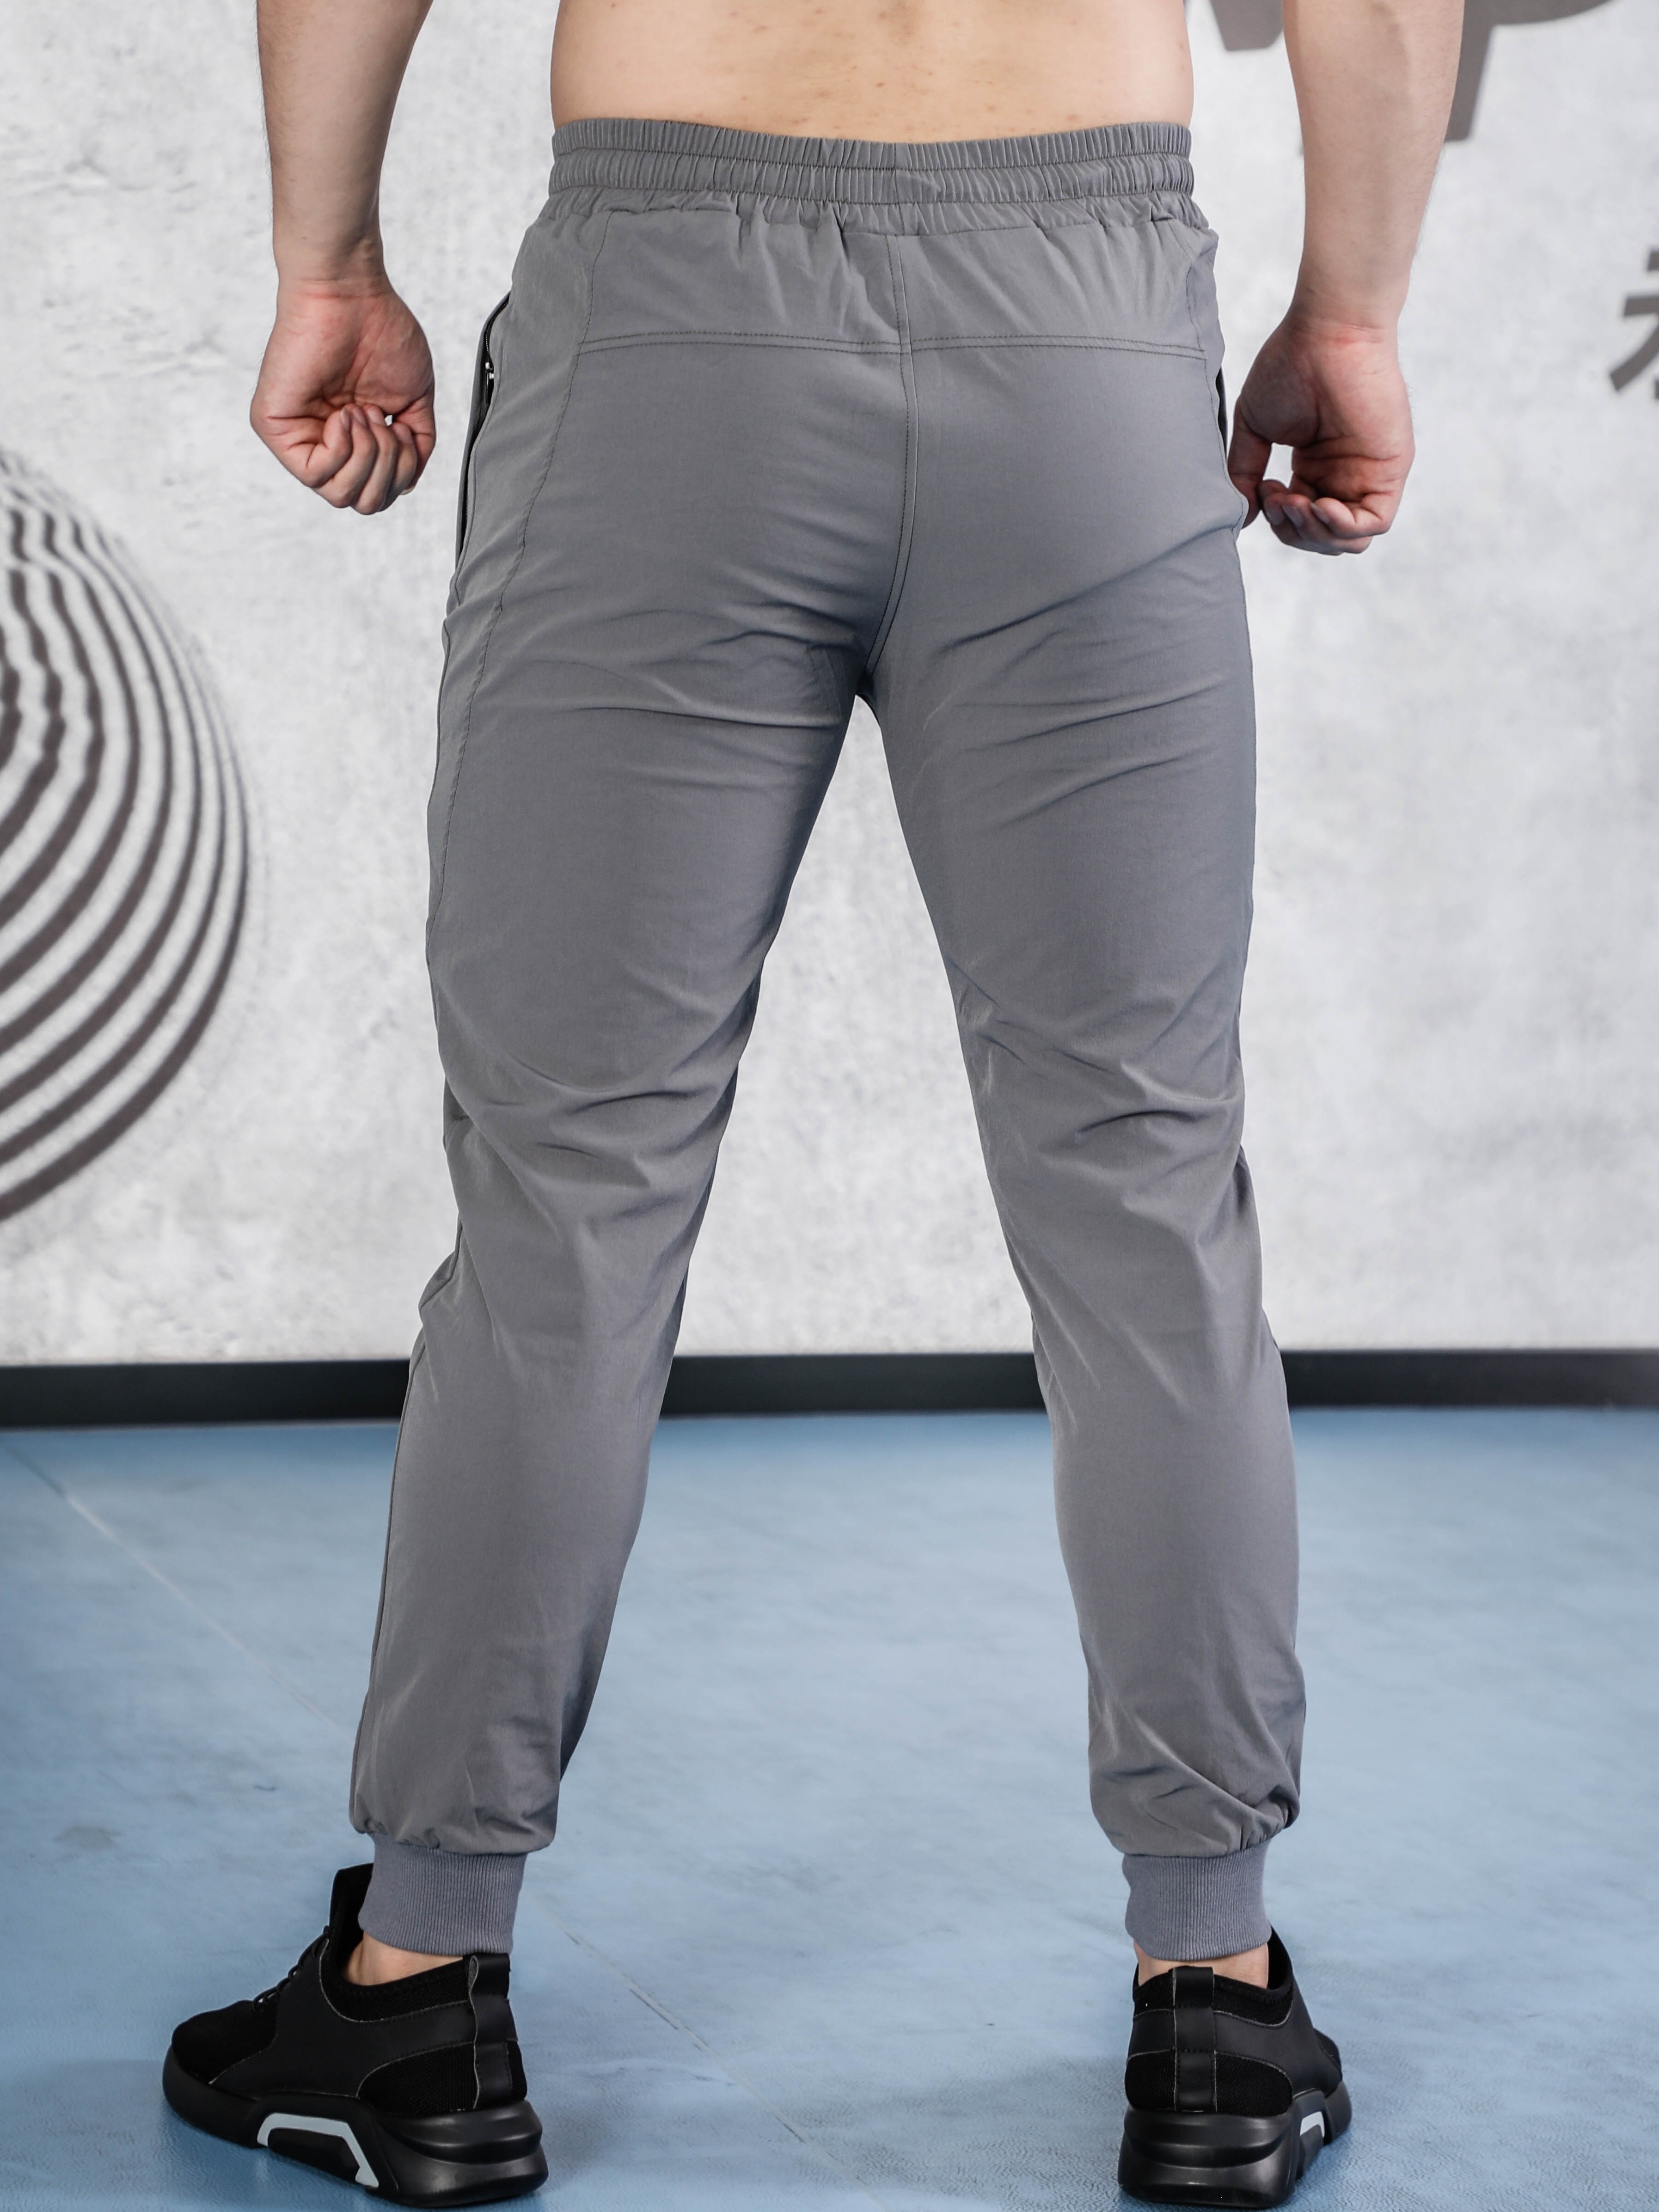  Mens Casual Drawstring Pants Mens Tapered Chinos Pants Gym  Pants for Men Workout Workout Pants for Men Gym Dark Gray : Clothing, Shoes  & Jewelry